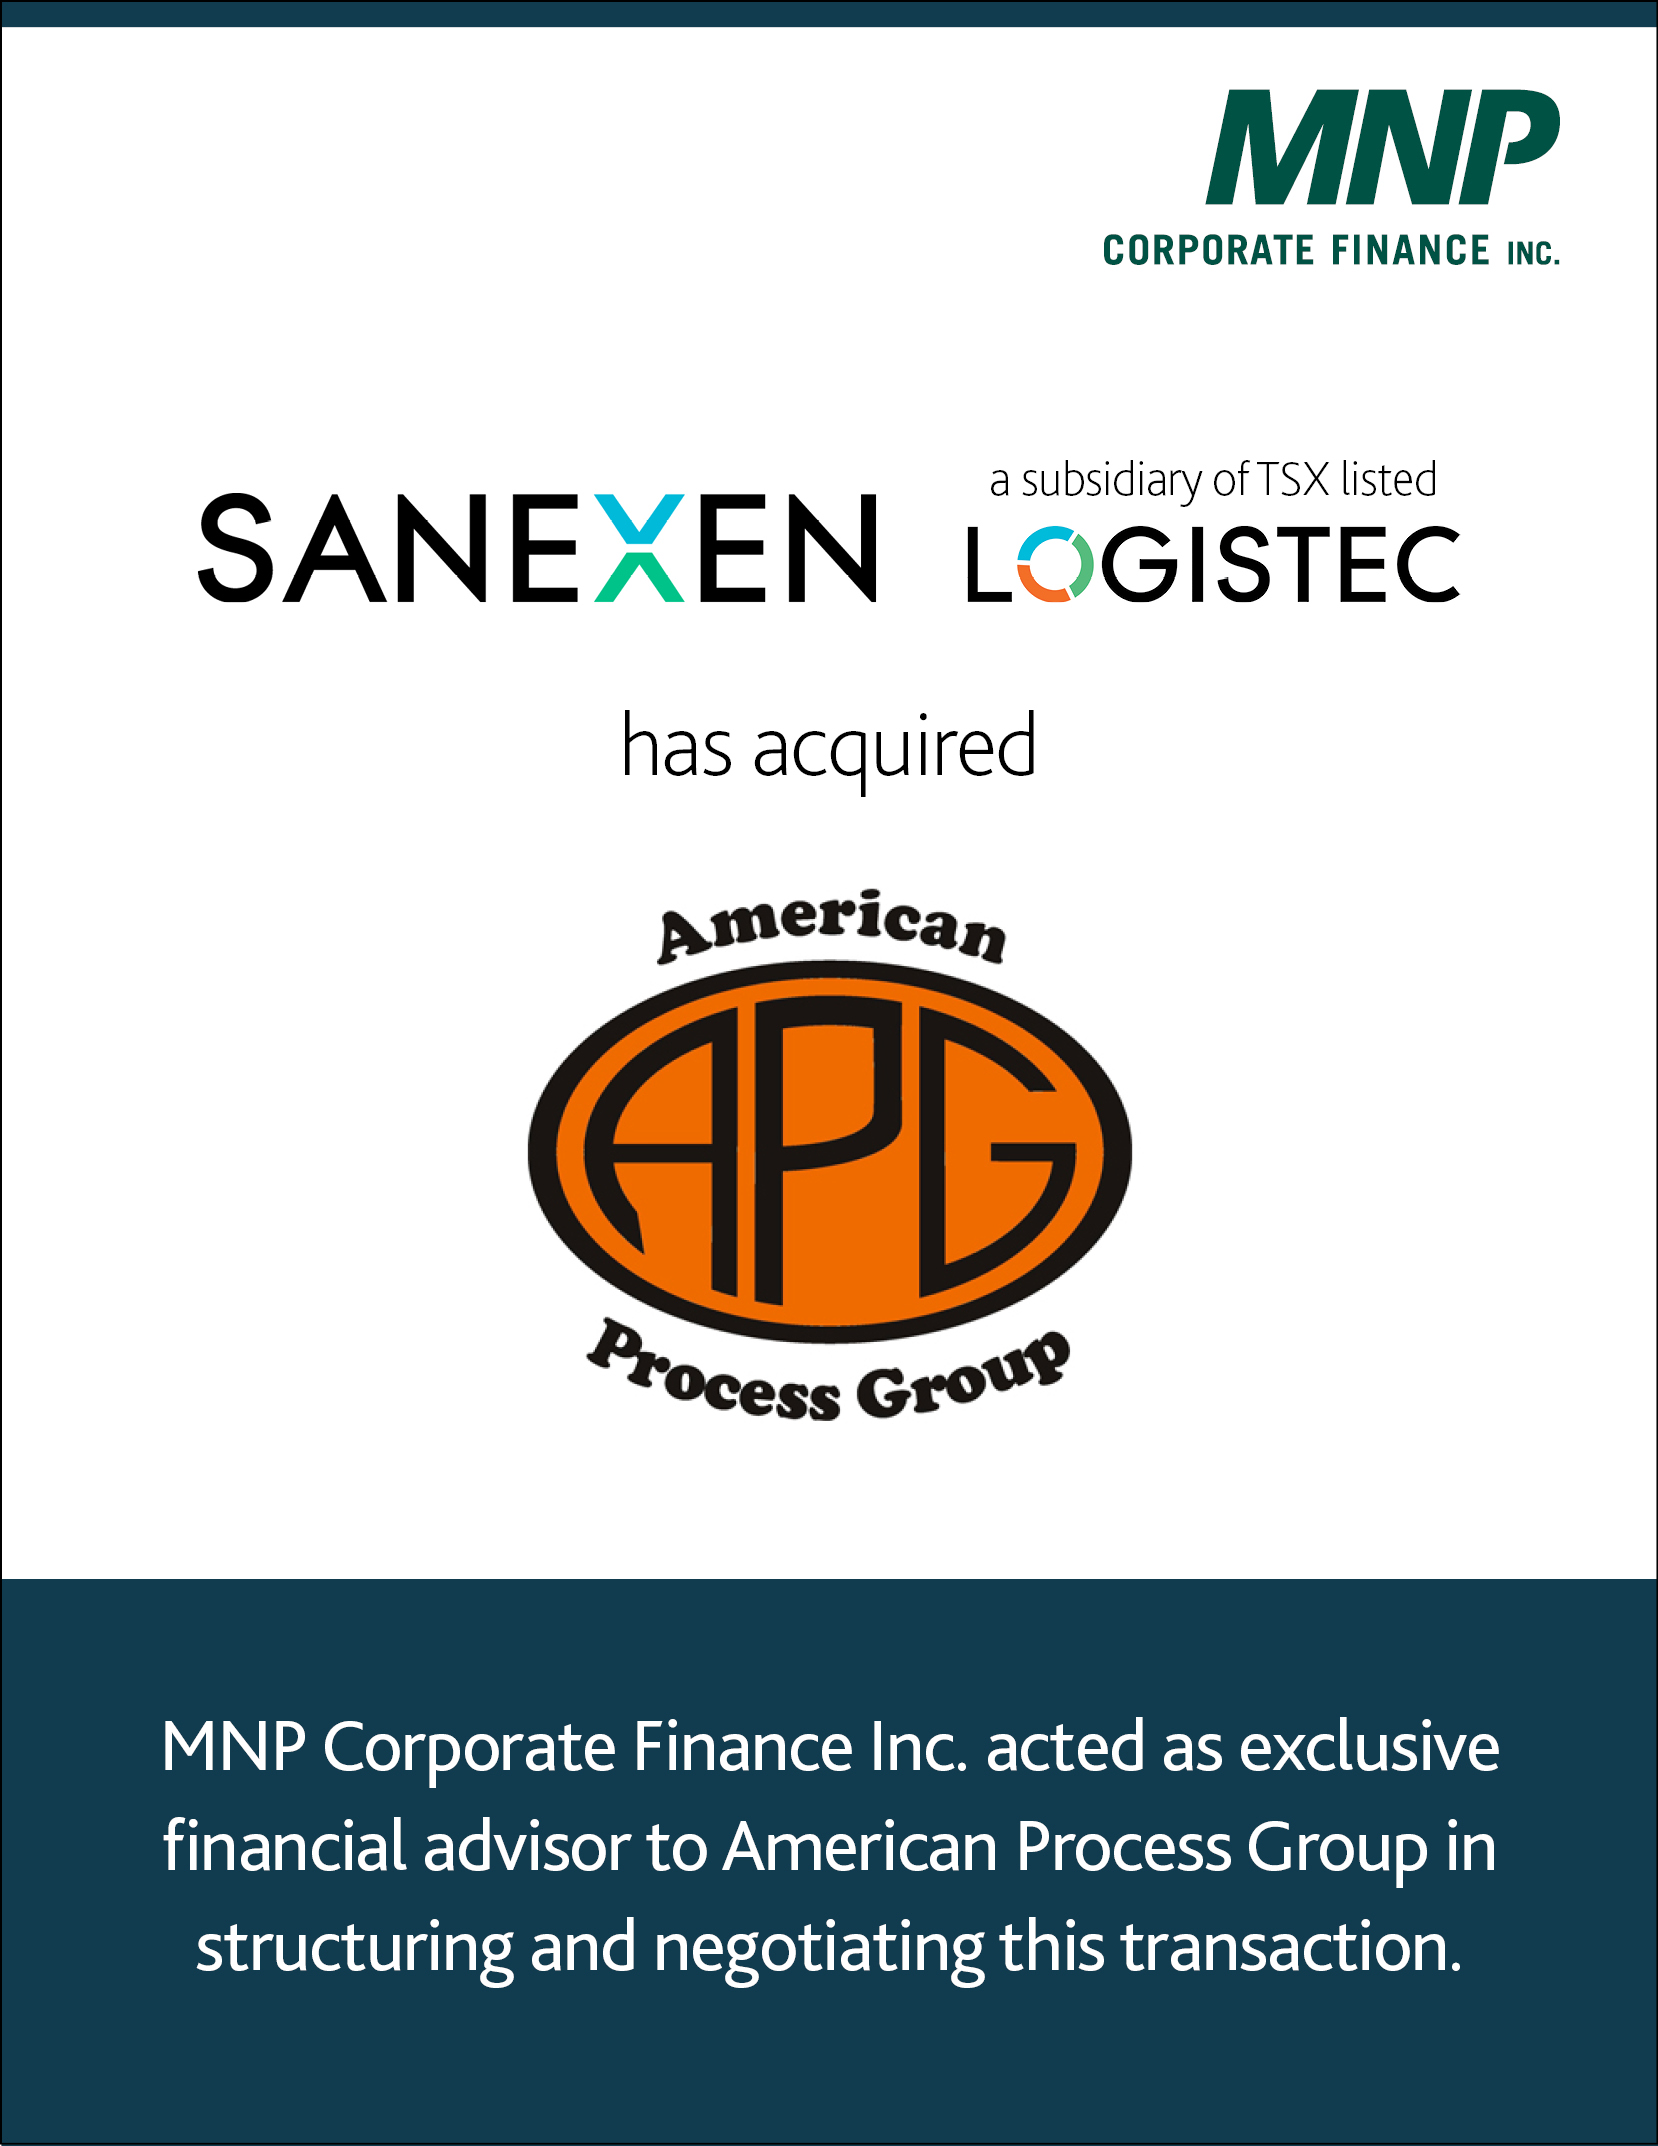 SANEXEN Environmental Services Inc. a subsidiary of TSX listed Logistec has acquired American Process Group